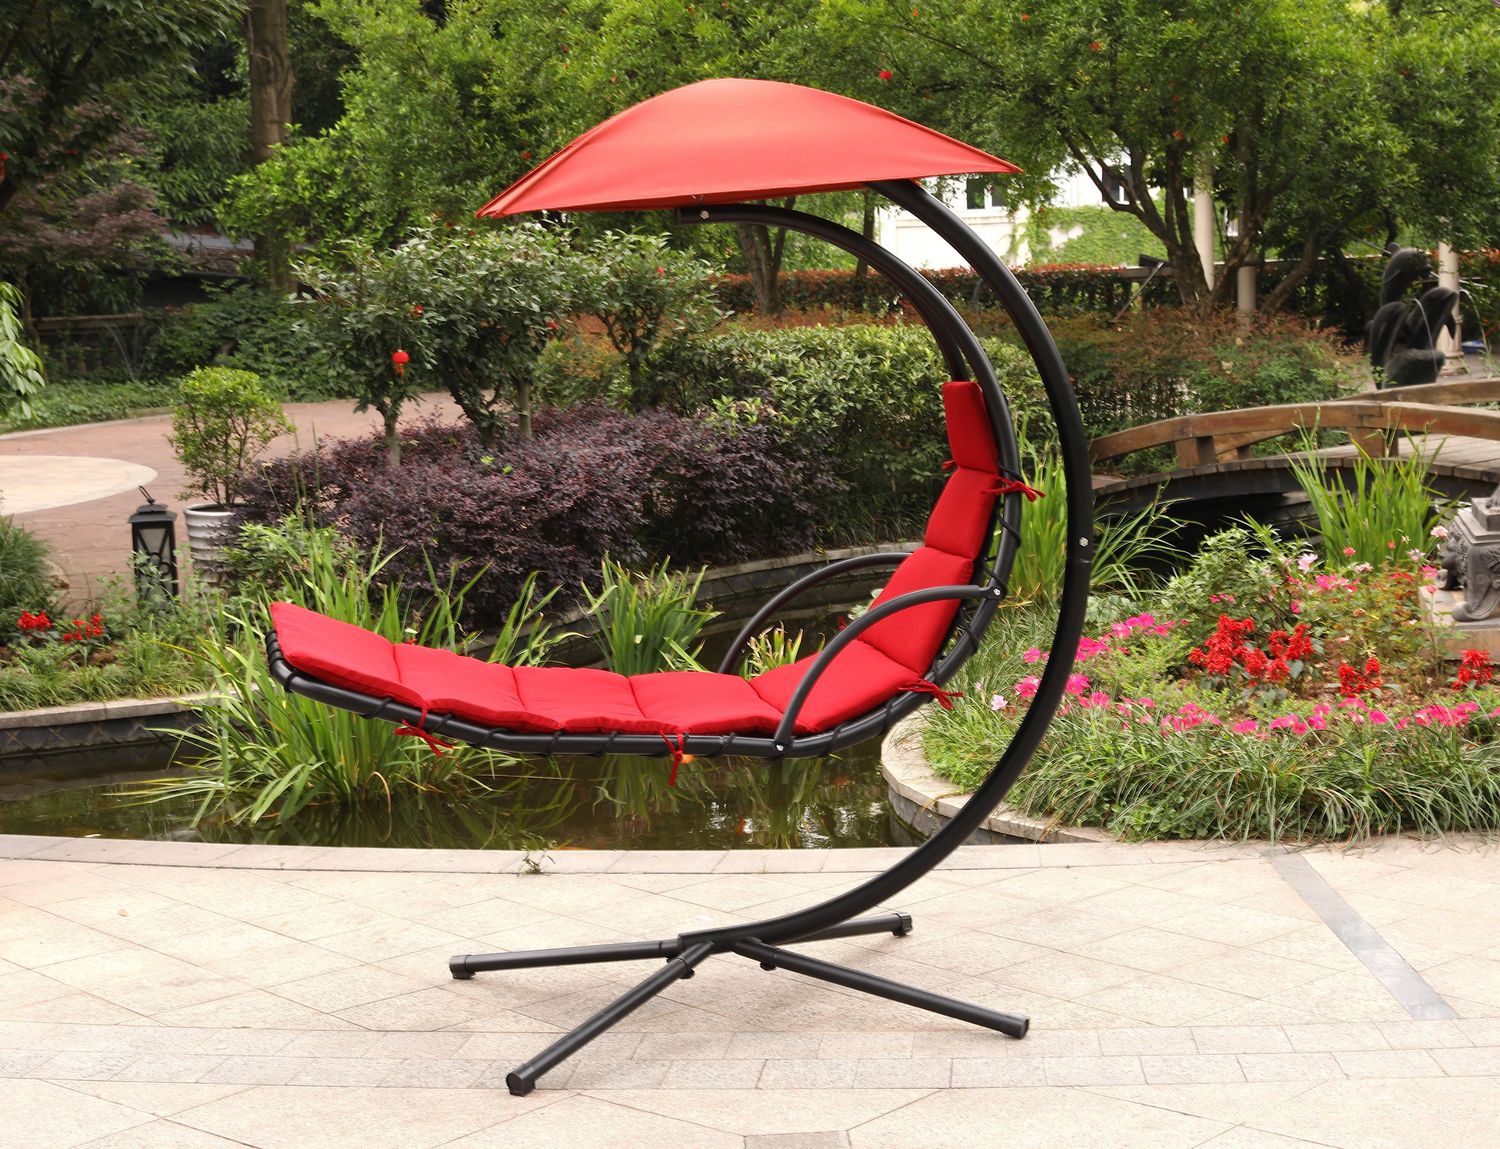 Beautifully designed Sky Lounger patio chaise lounge by Onsight